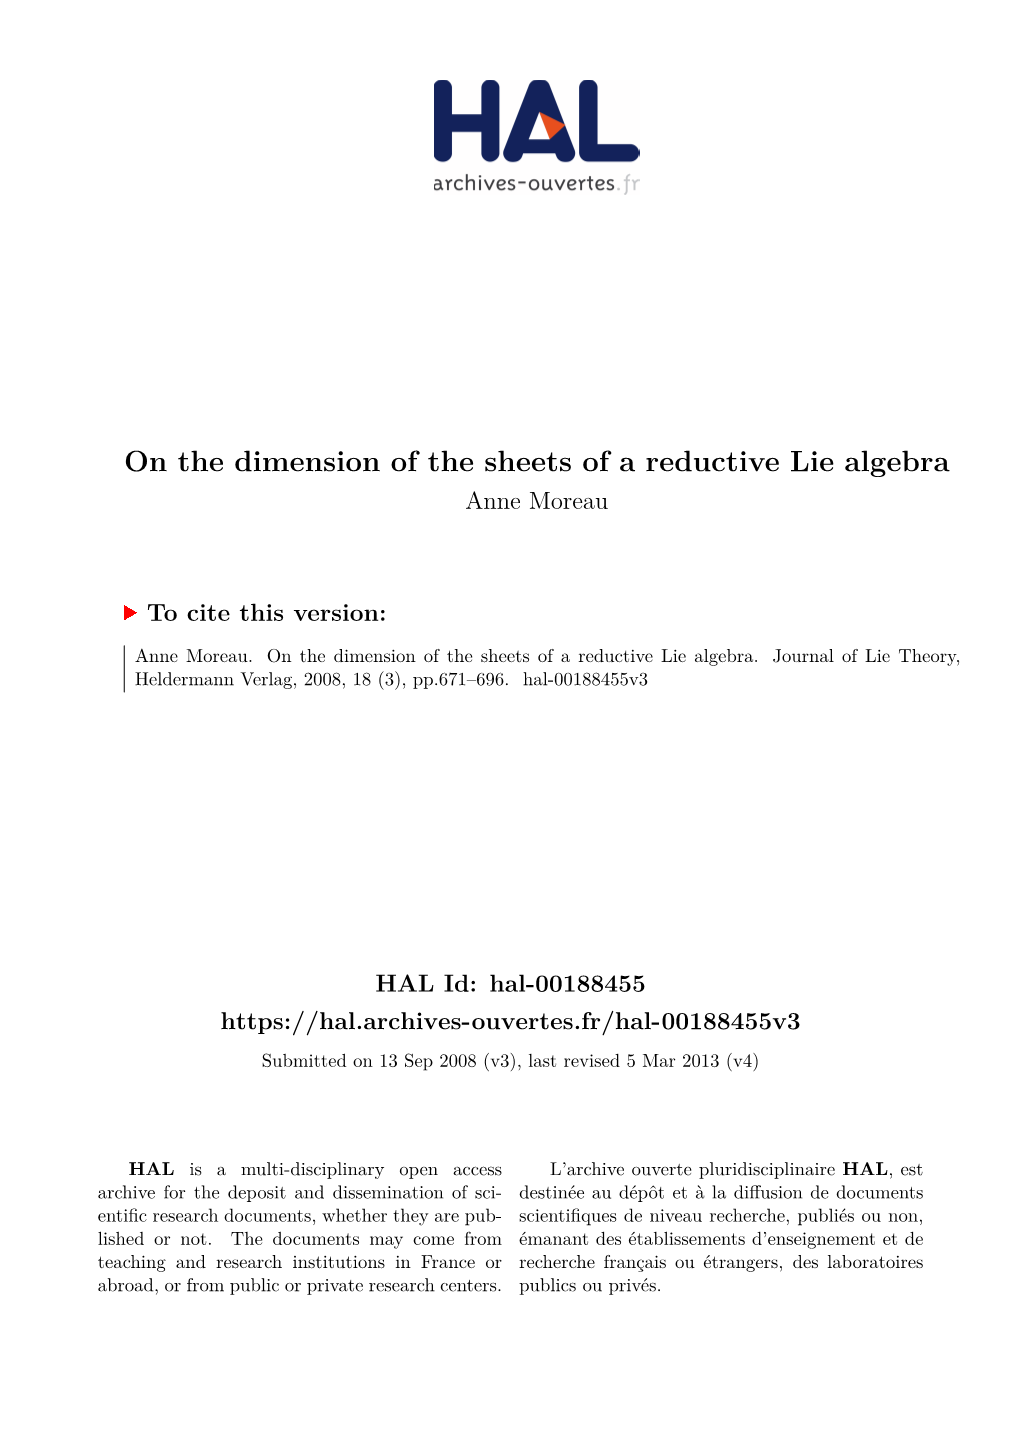 On the Dimension of the Sheets of a Reductive Lie Algebra Anne Moreau